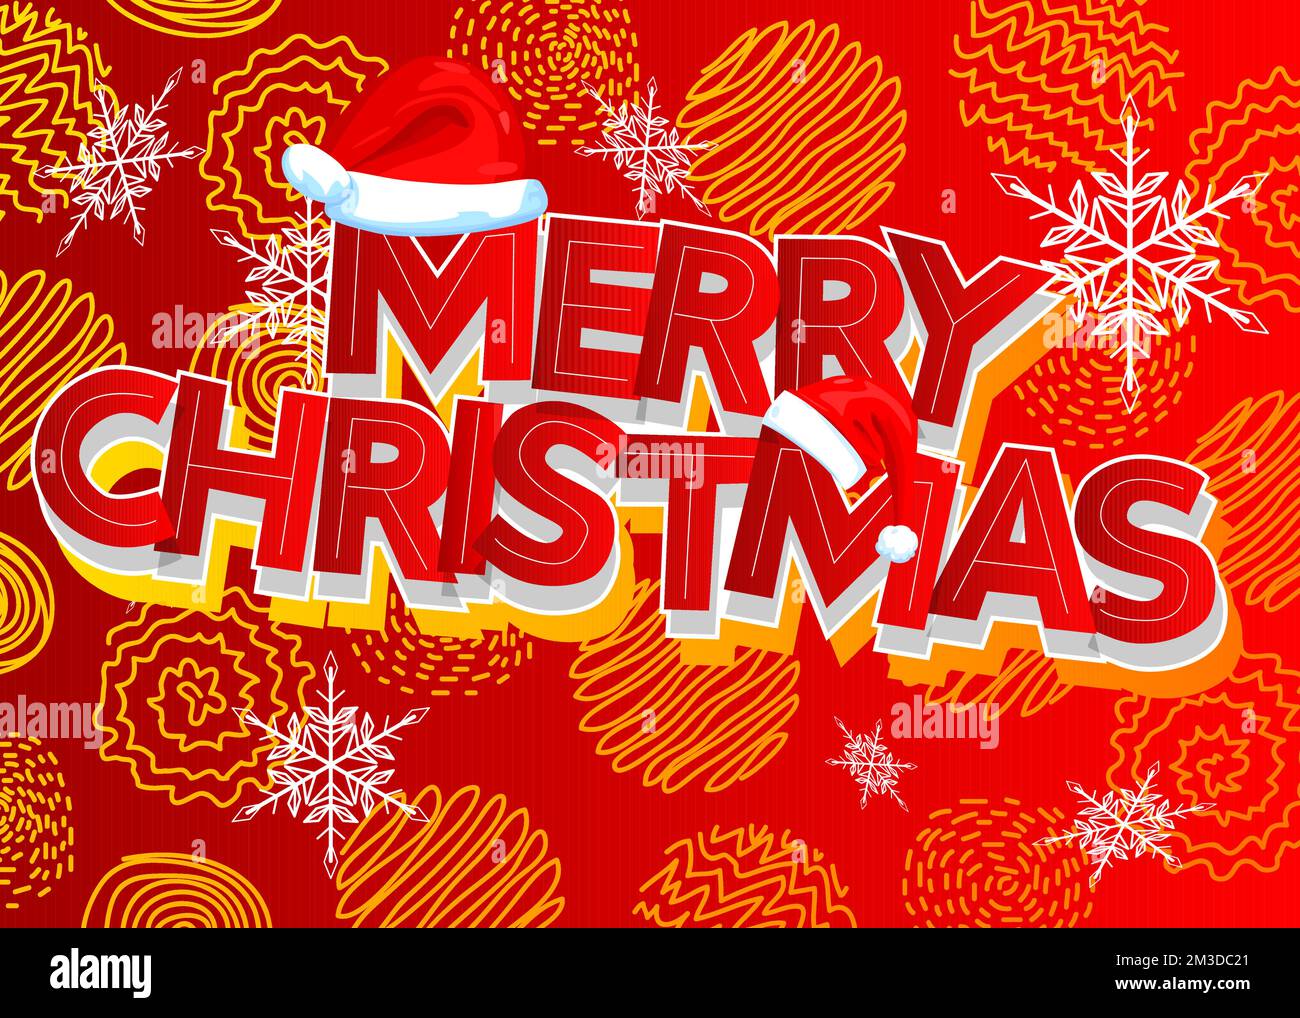 Merry Christmas. Word written with Children's font in cartoon style. Stock Vector